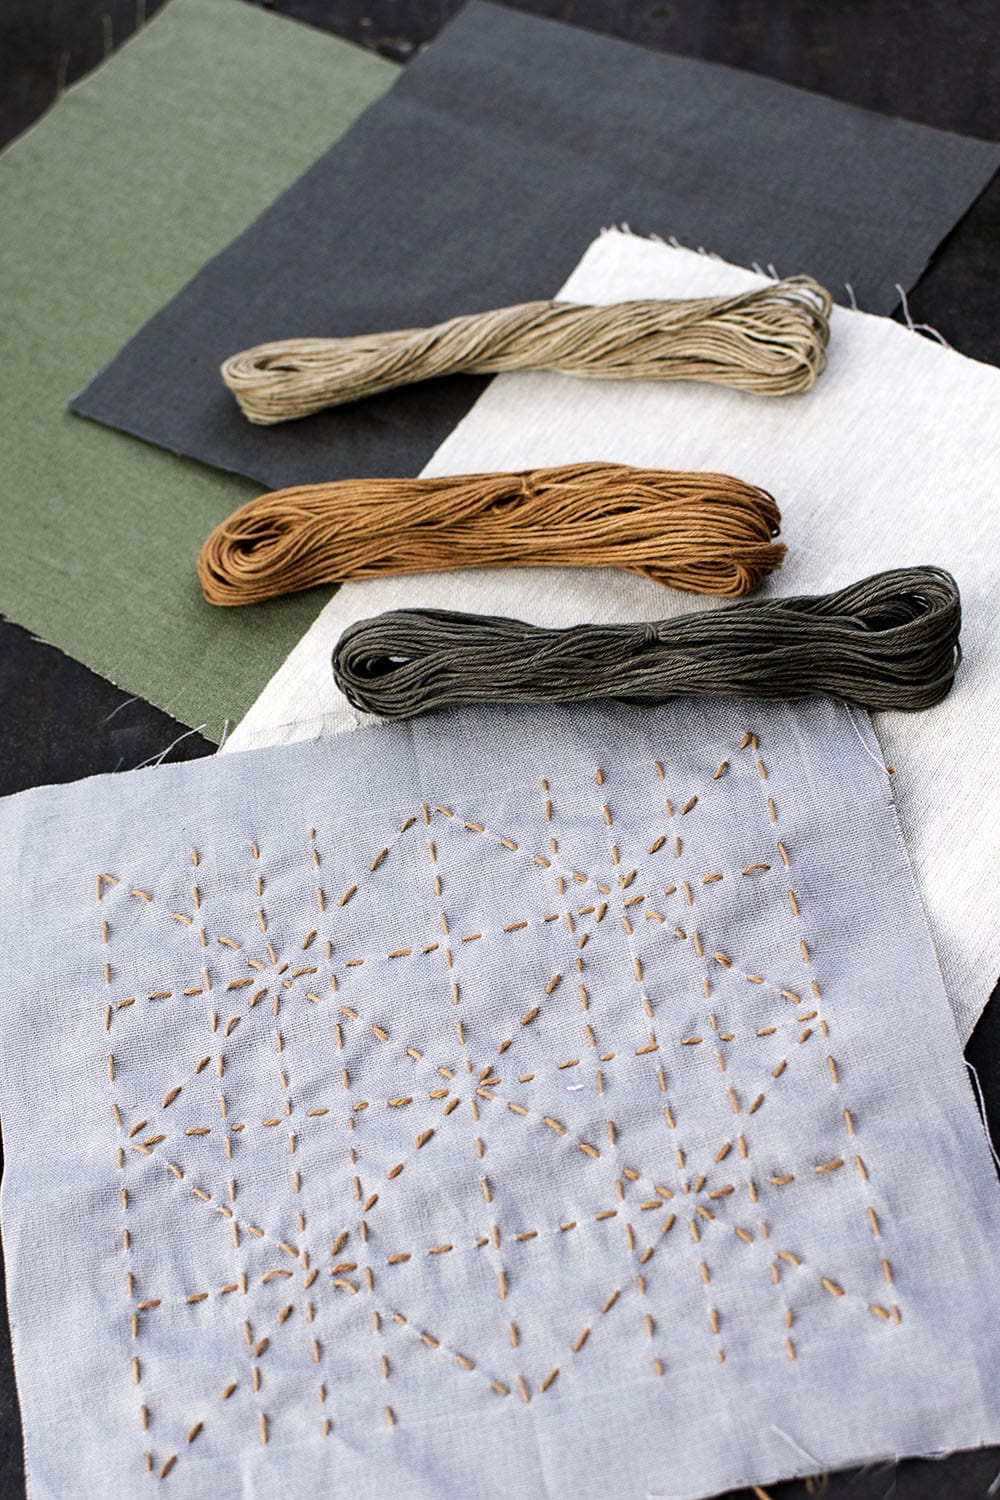 WonderFil Specialty Threads - Sashiko Embroidery by Hand Using